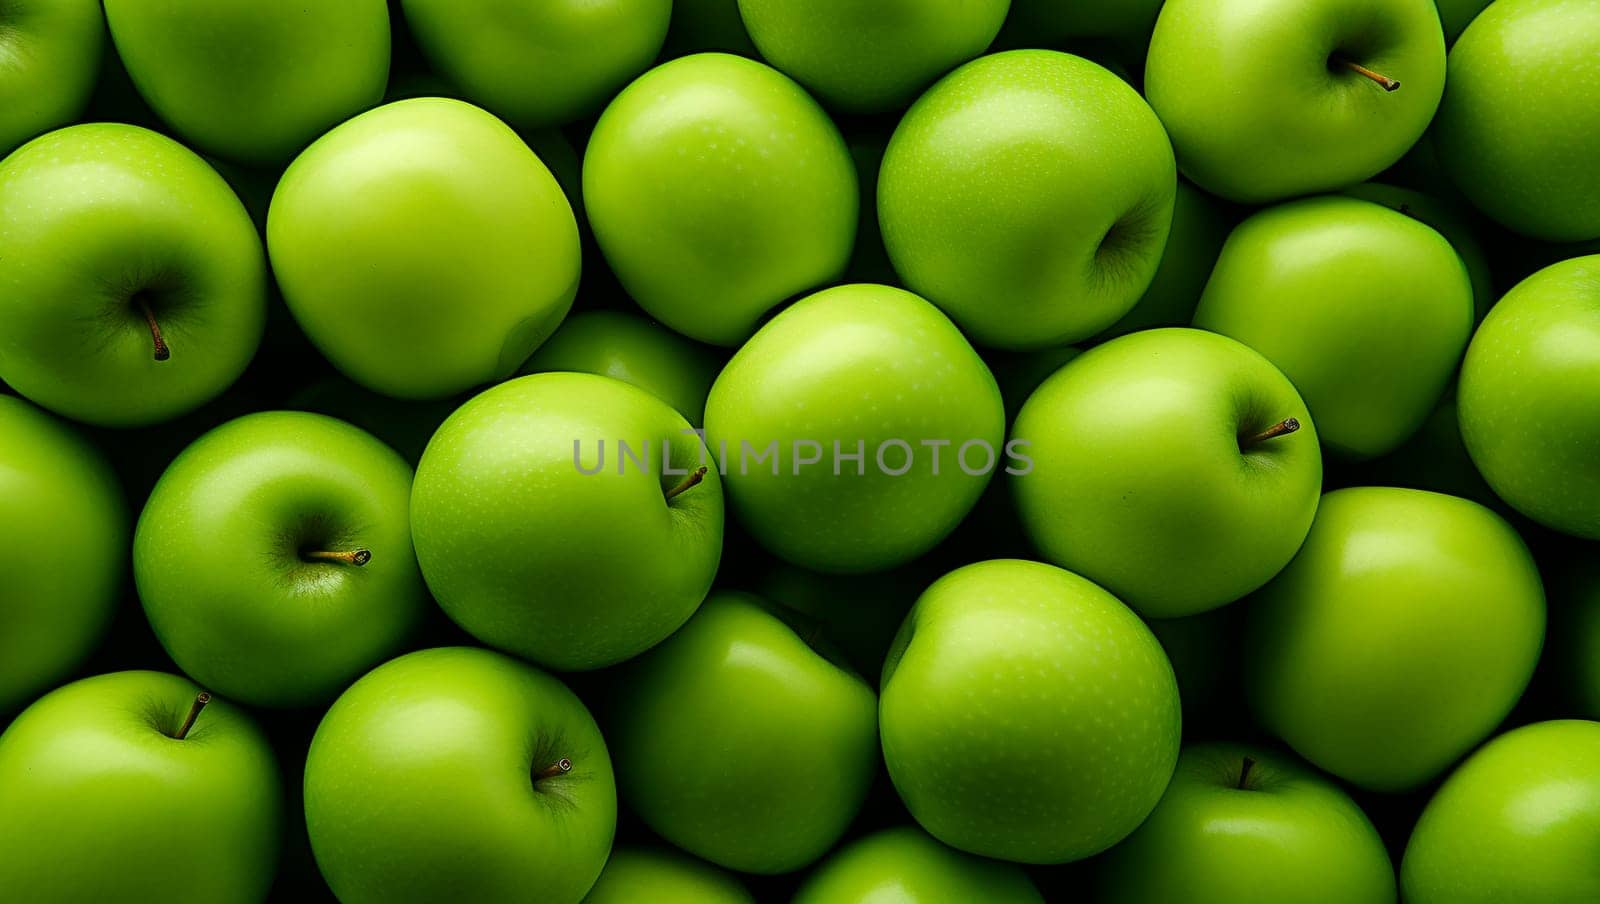 Lots of green apples. Background of apples. High quality photo